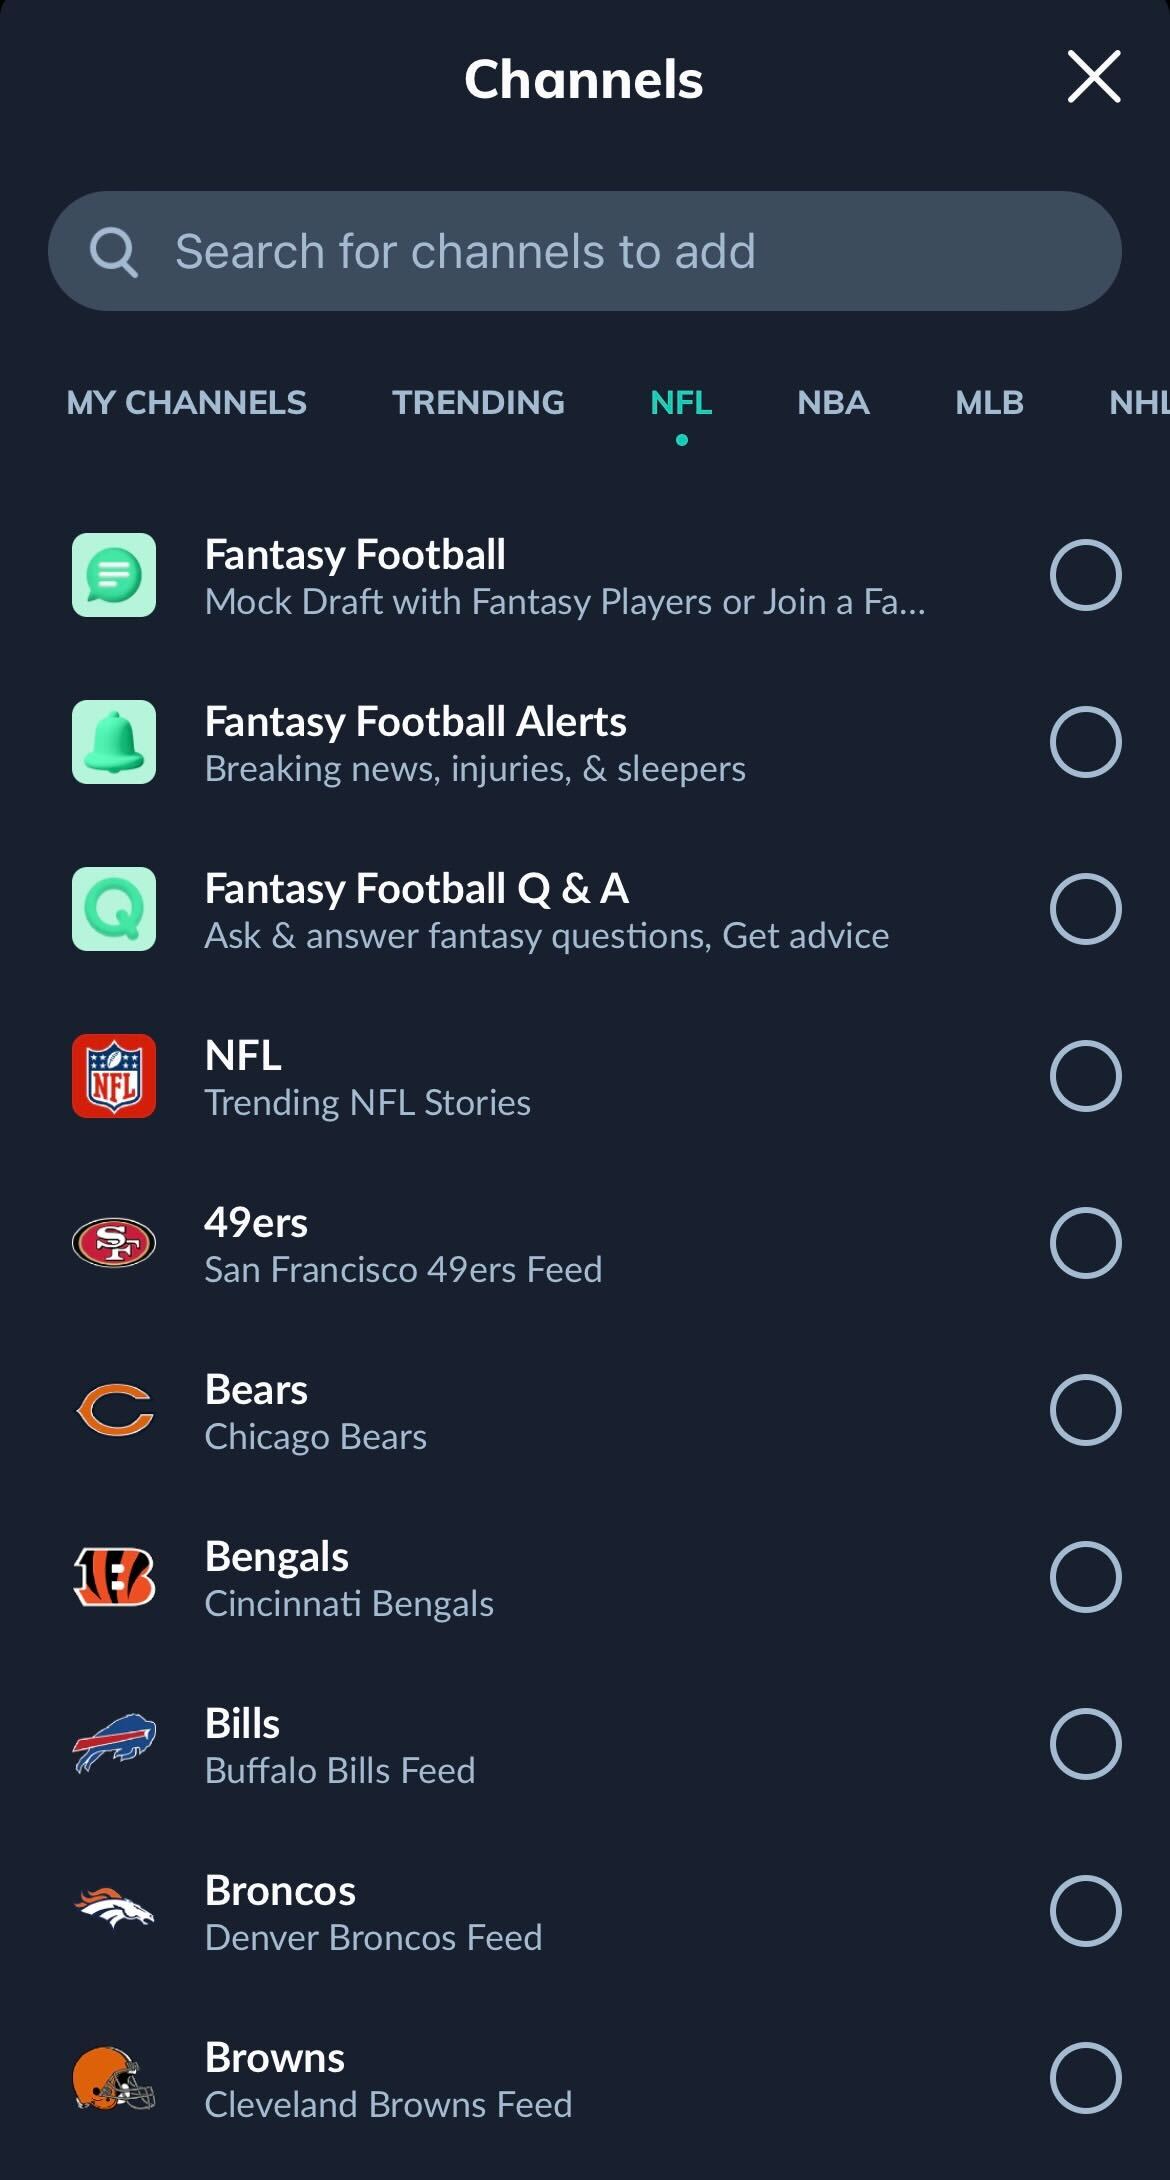 Every team has their own channel in Sleeper Fantasy